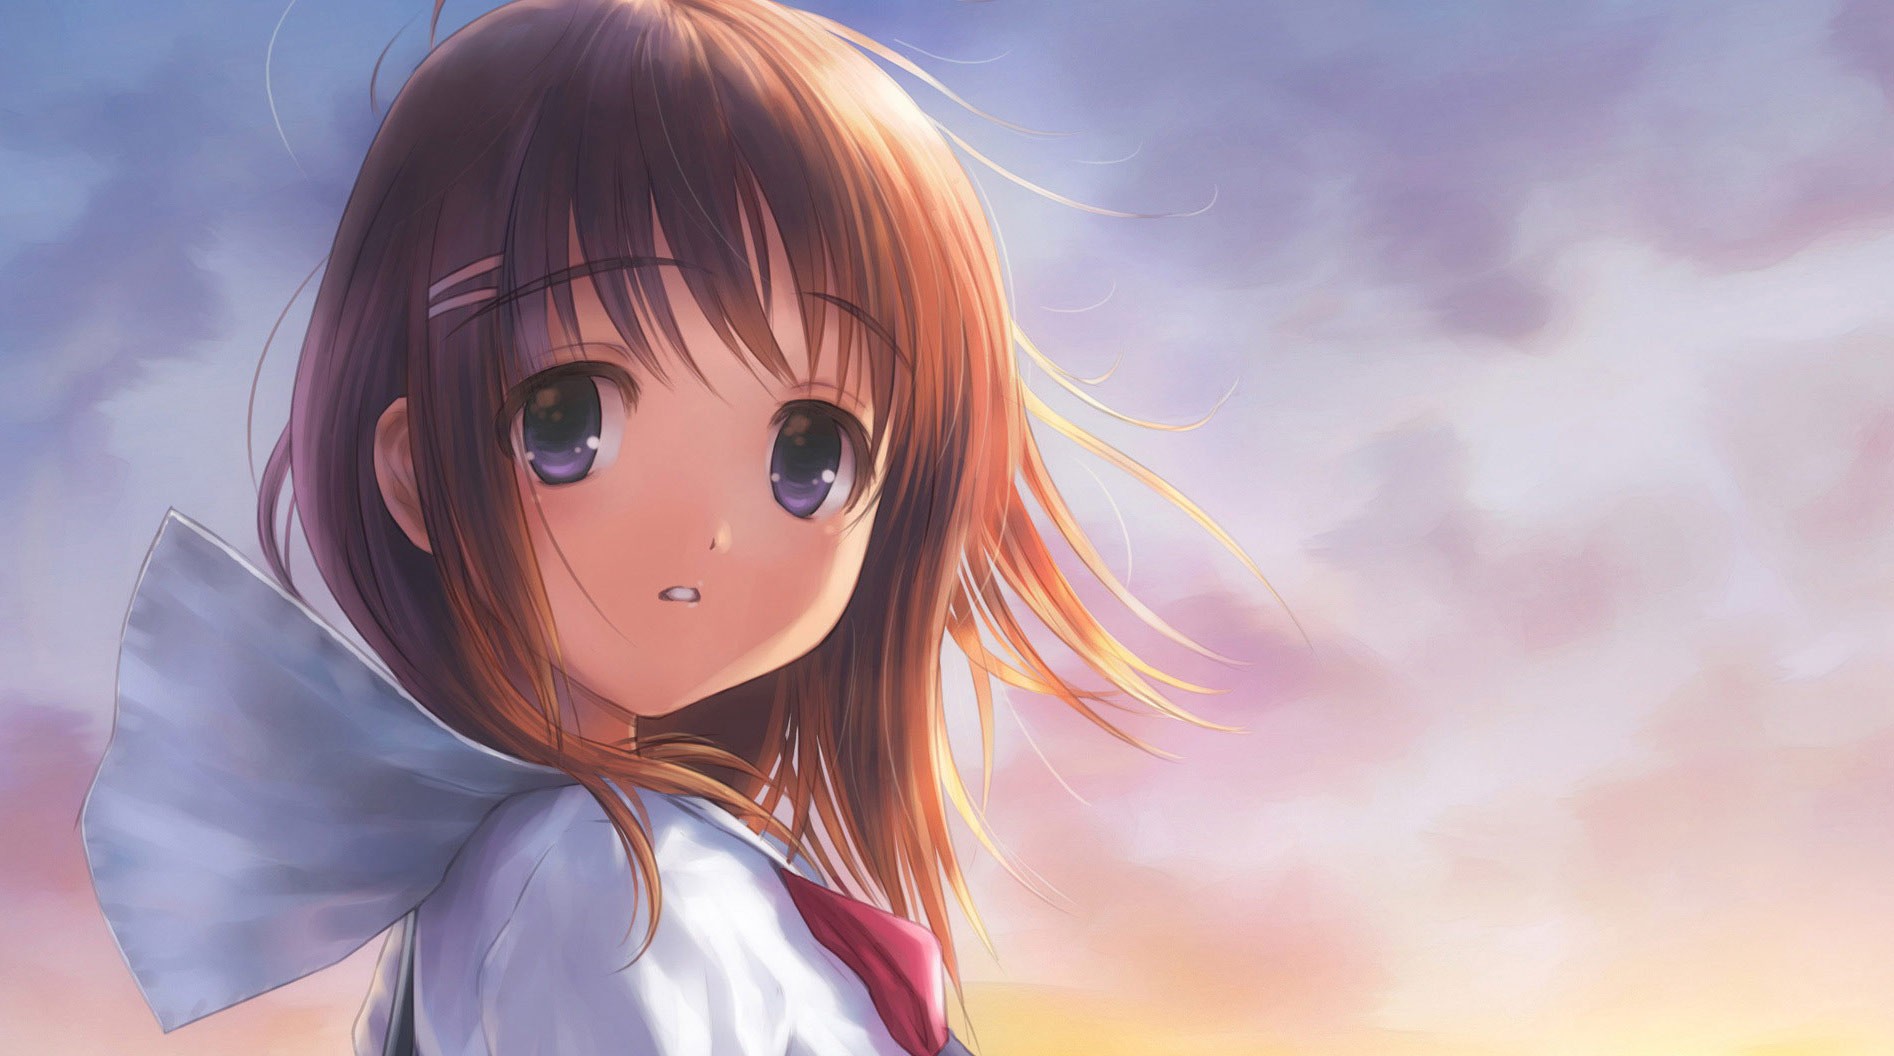  By Stephen Comments Off on Cute Anime Girl HD Wallpapers